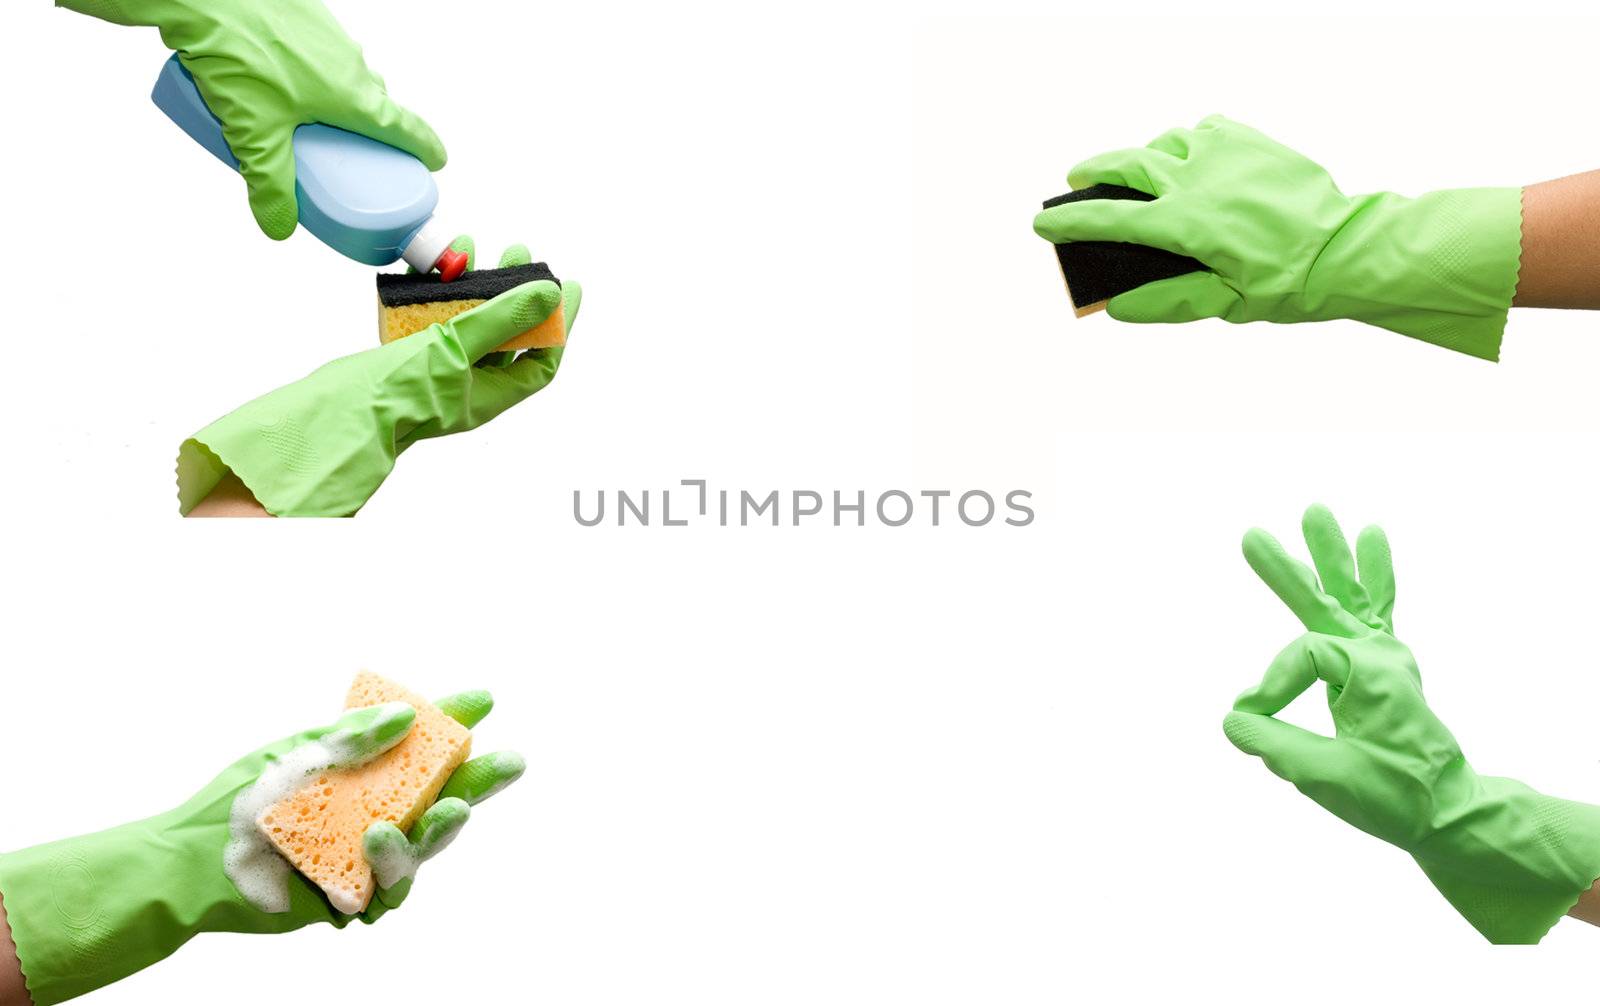 Hand with green glove holding foamy cleaning sponge isolated on white